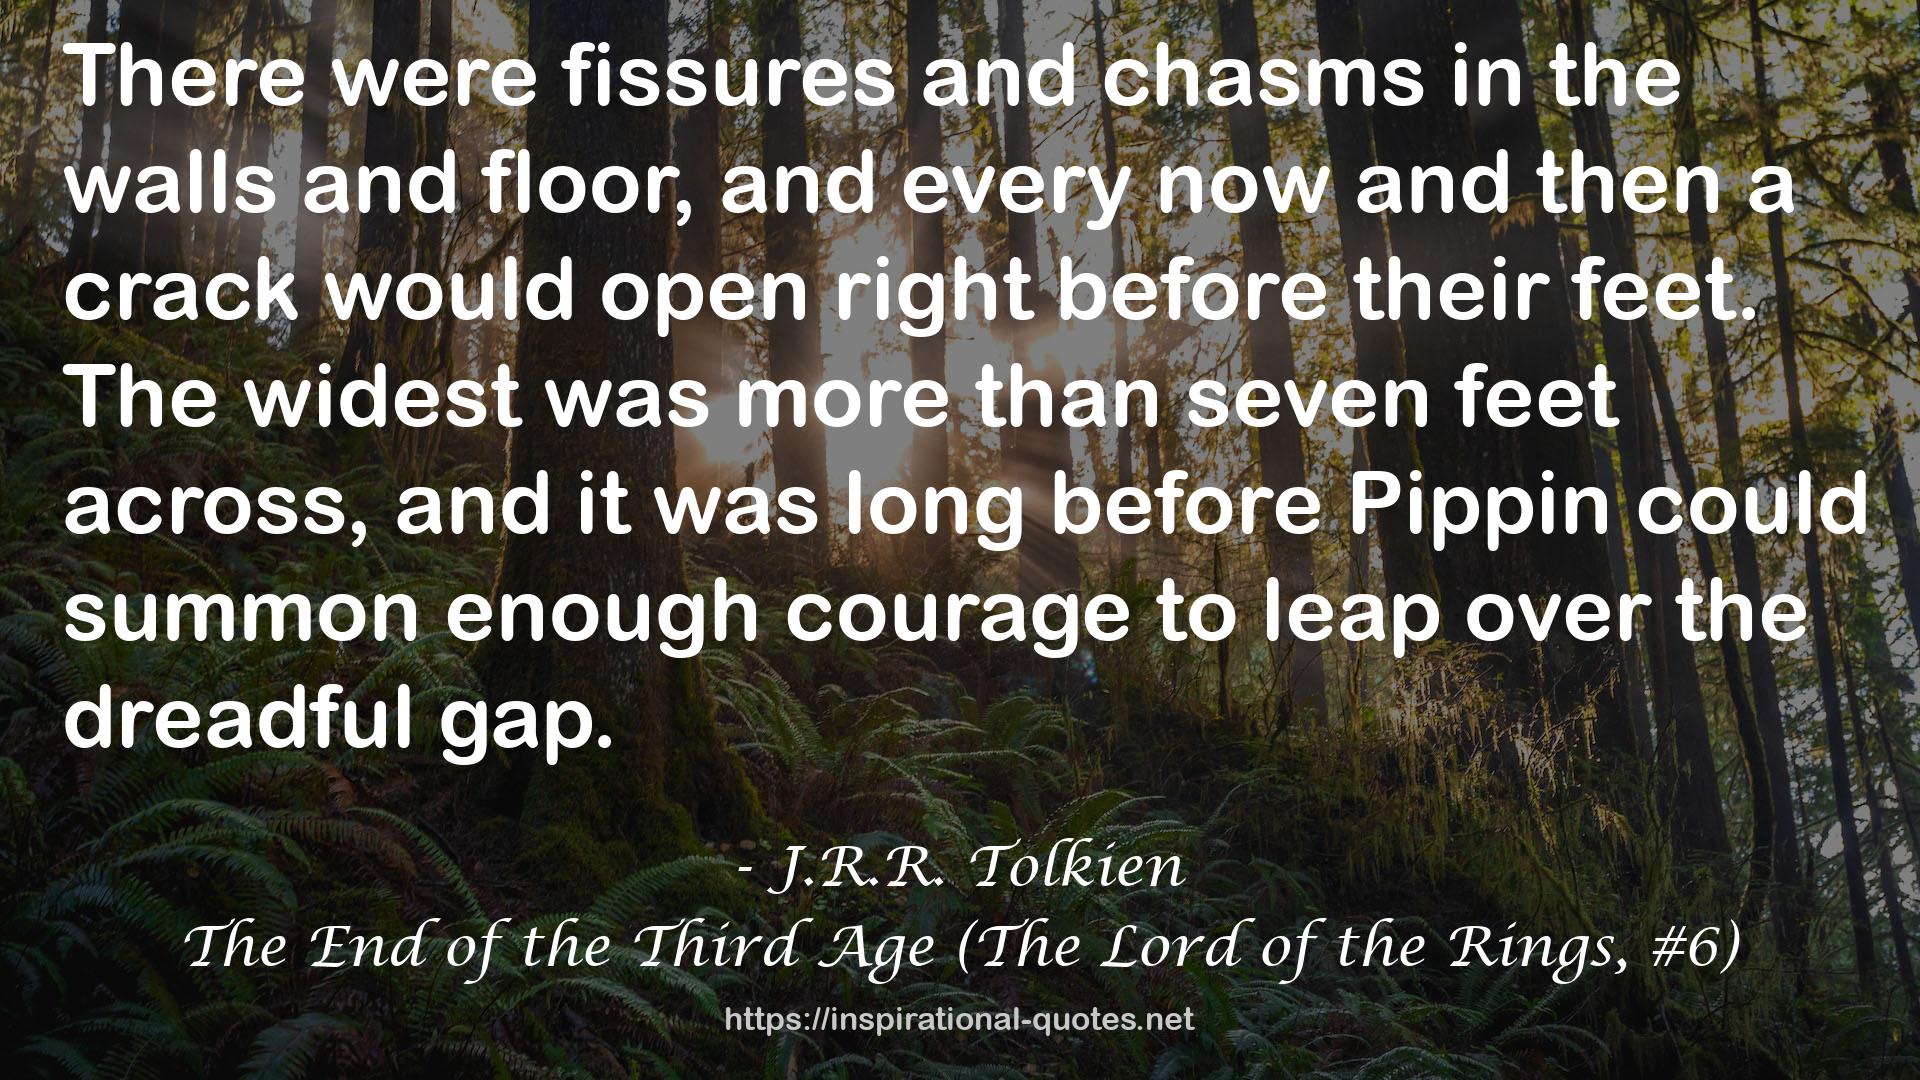 The End of the Third Age (The Lord of the Rings, #6) QUOTES